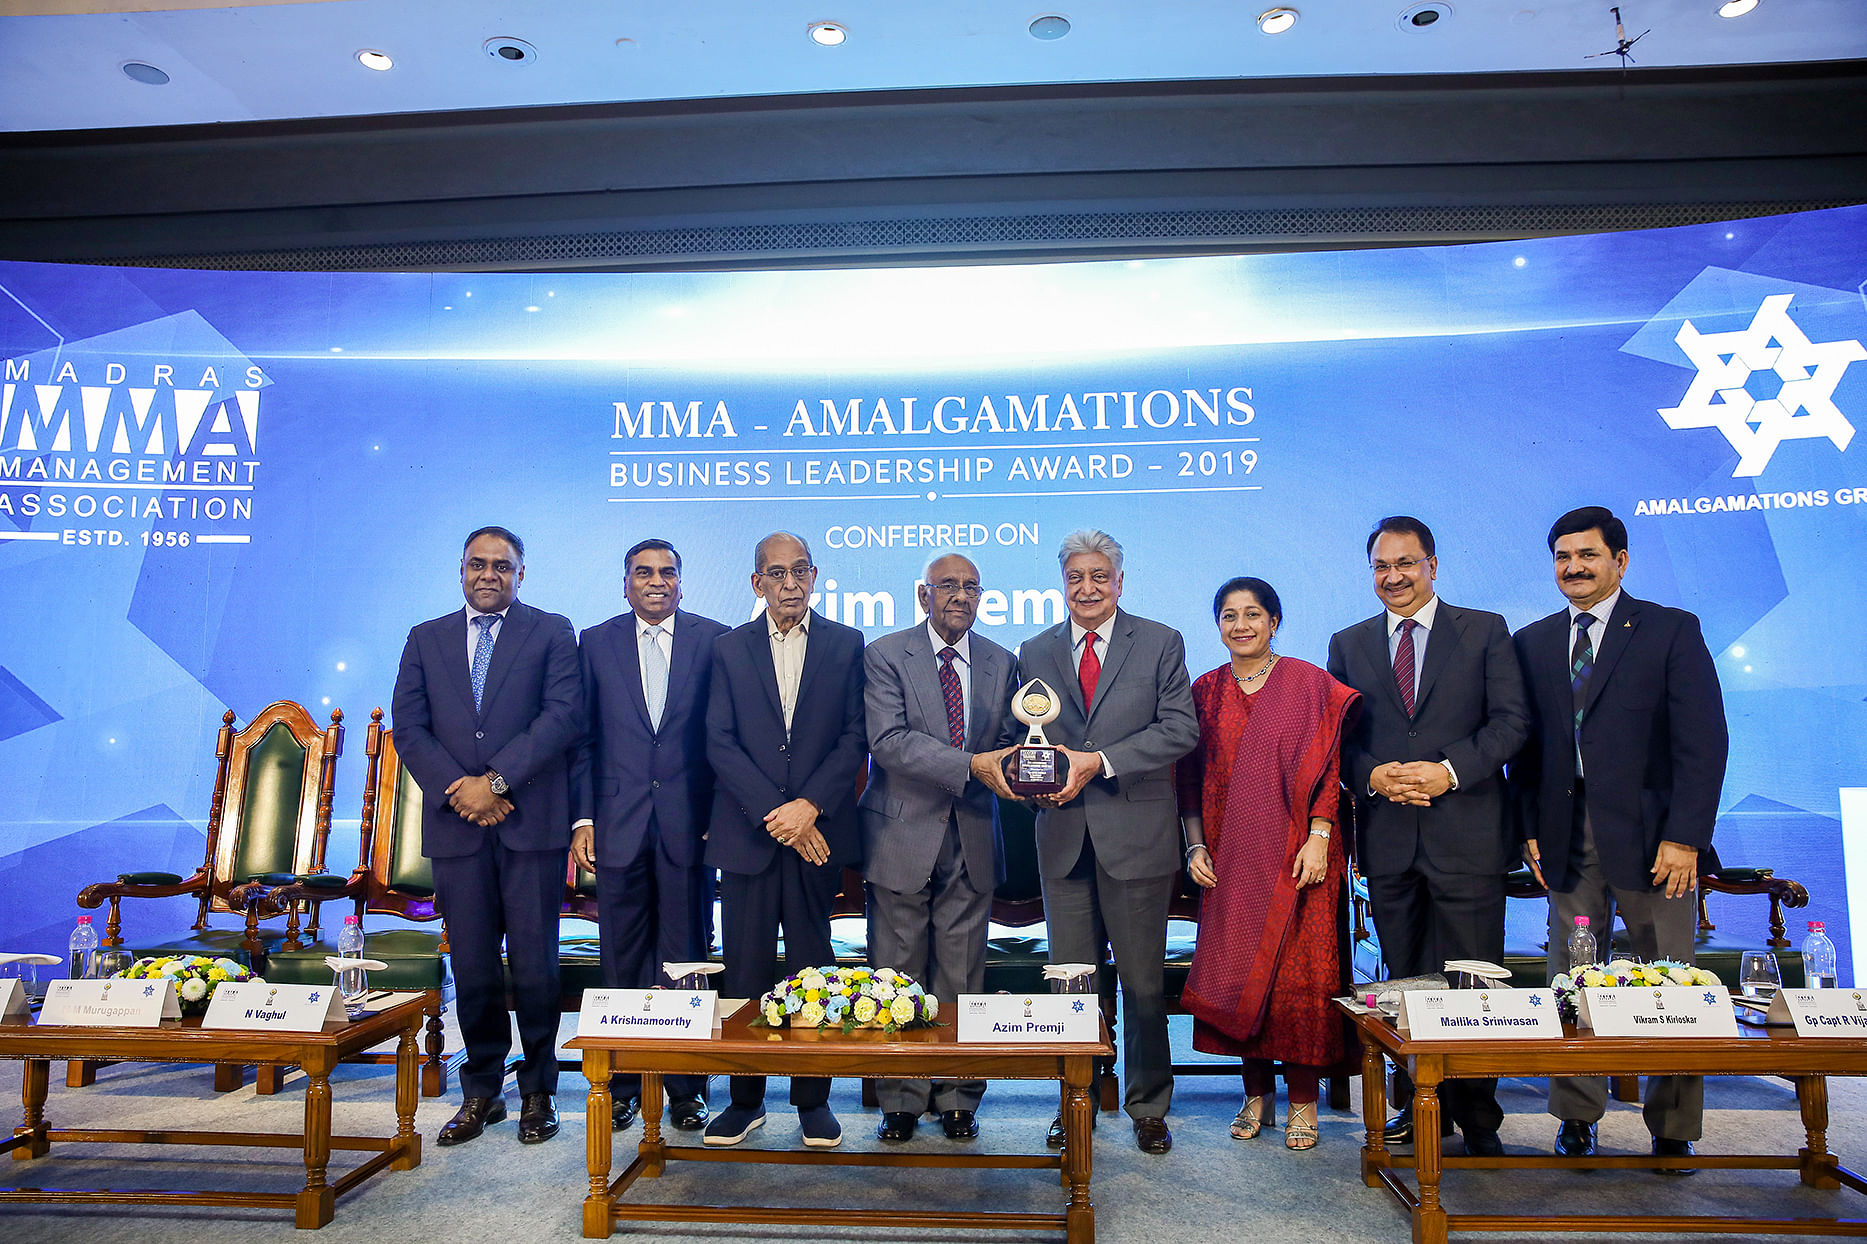 Wipro chairman Azim Premji being presented with Madras Management Association-Amalgamations Business Leadership Award 2019 by A Krishnamoorthy, Chairman, Amalgamations Group in Chennai on Thursday. TAFE Chairperson Mallika Srinivasan is also seen. DH photo